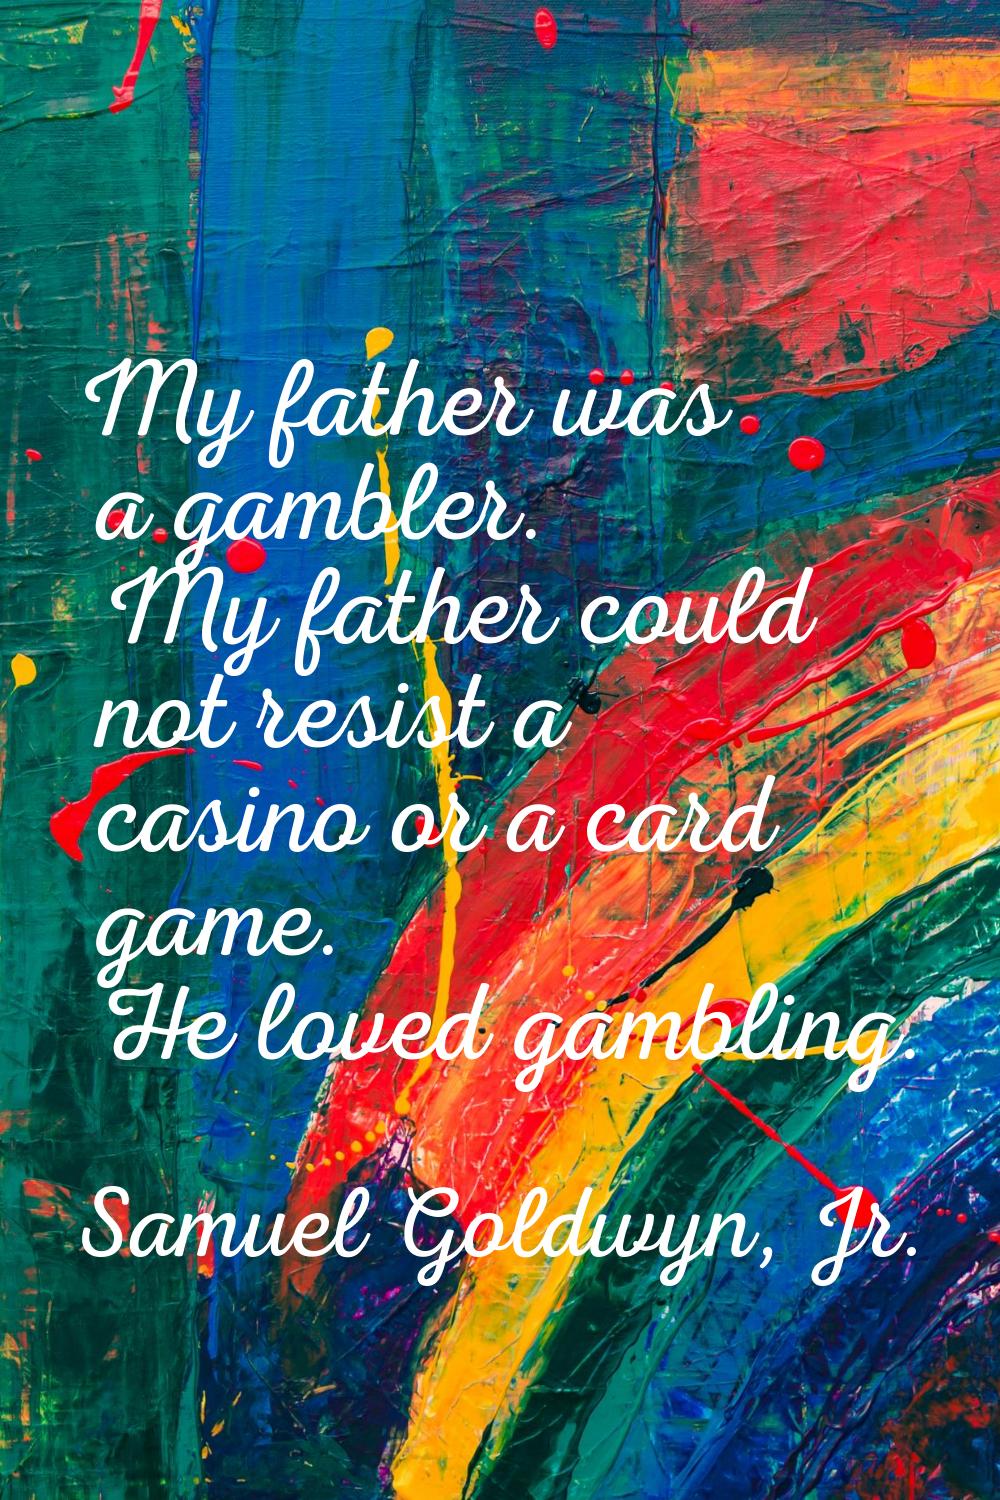 My father was a gambler. My father could not resist a casino or a card game. He loved gambling.